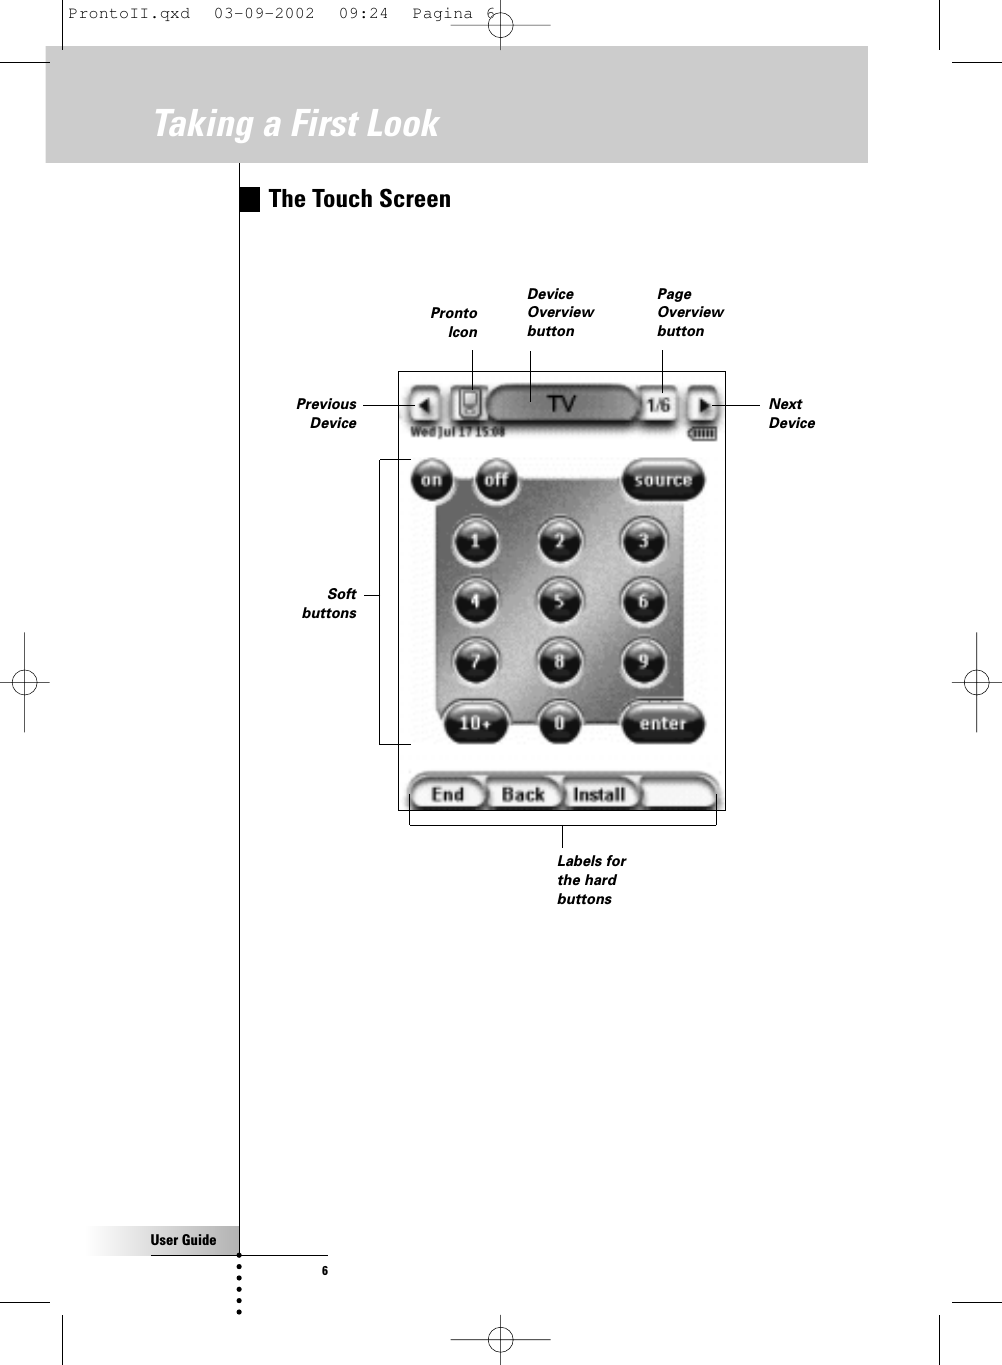 User Guide6Taking a First LookThe Touch Screen Labels forthe hardbuttonsNextDevicePreviousDeviceProntoIconDeviceOverviewbuttonPageOverviewbuttonSoftbuttonsProntoII.qxd  03-09-2002  09:24  Pagina 6